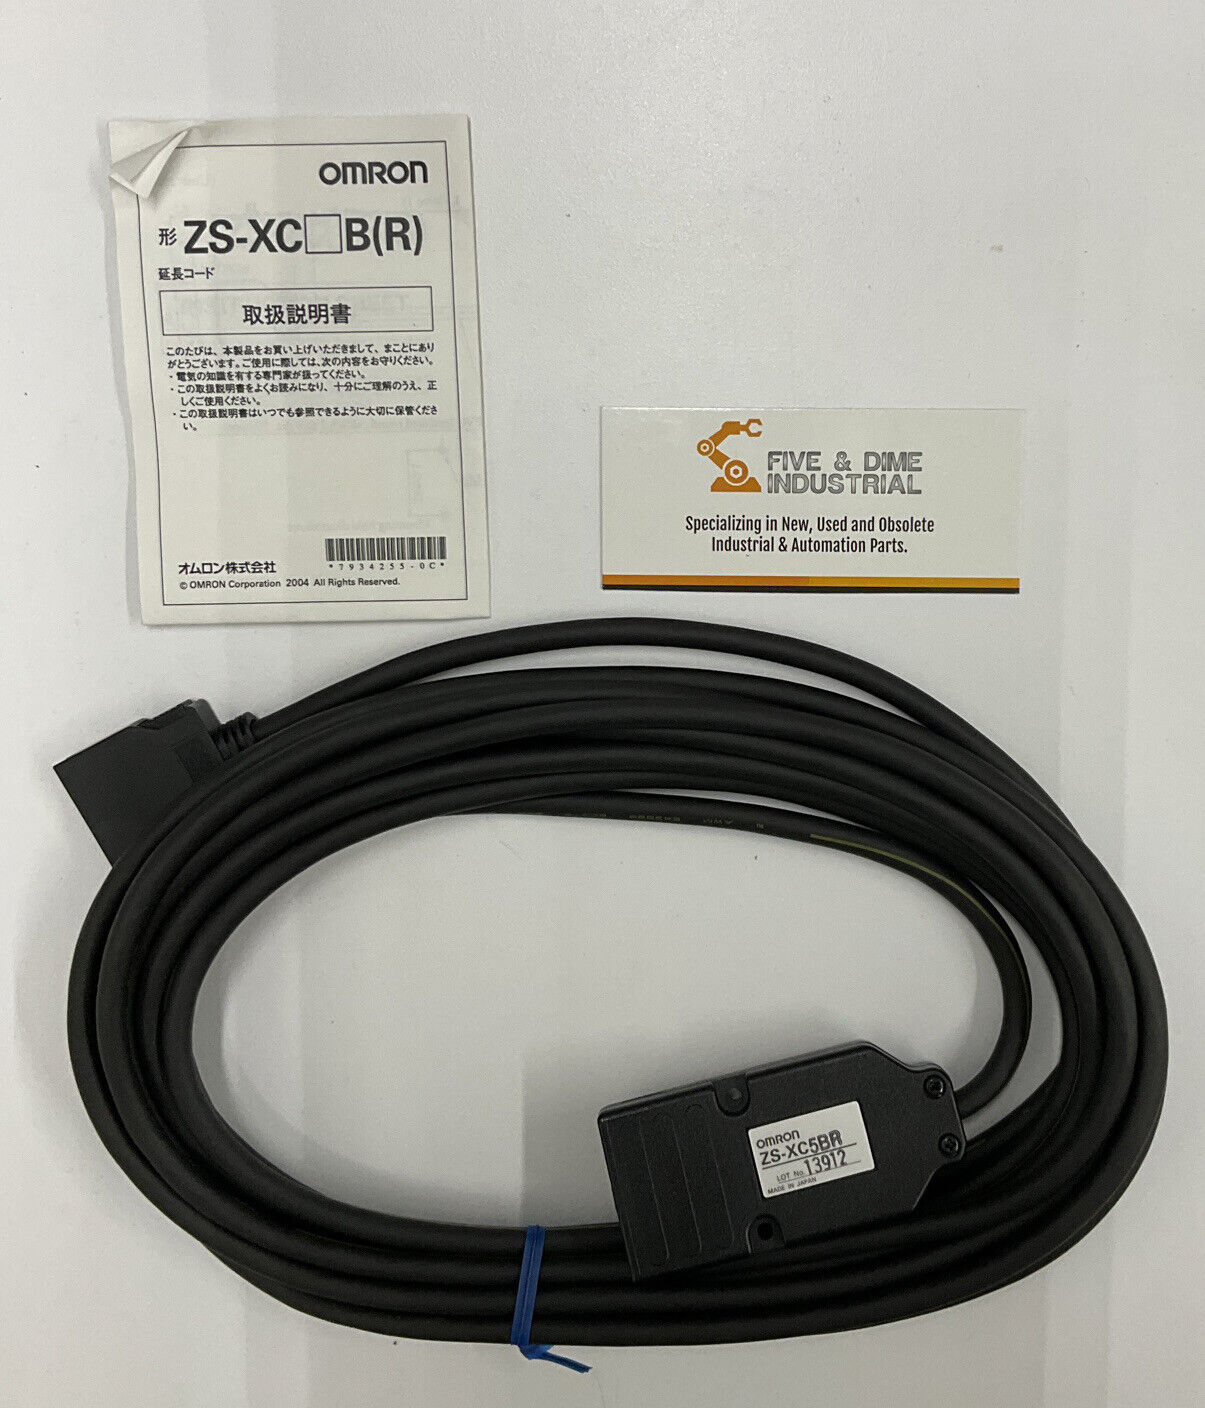 OMRON ZS-XC5BR 5M New Sensor Head Extension Cable (CBL124)